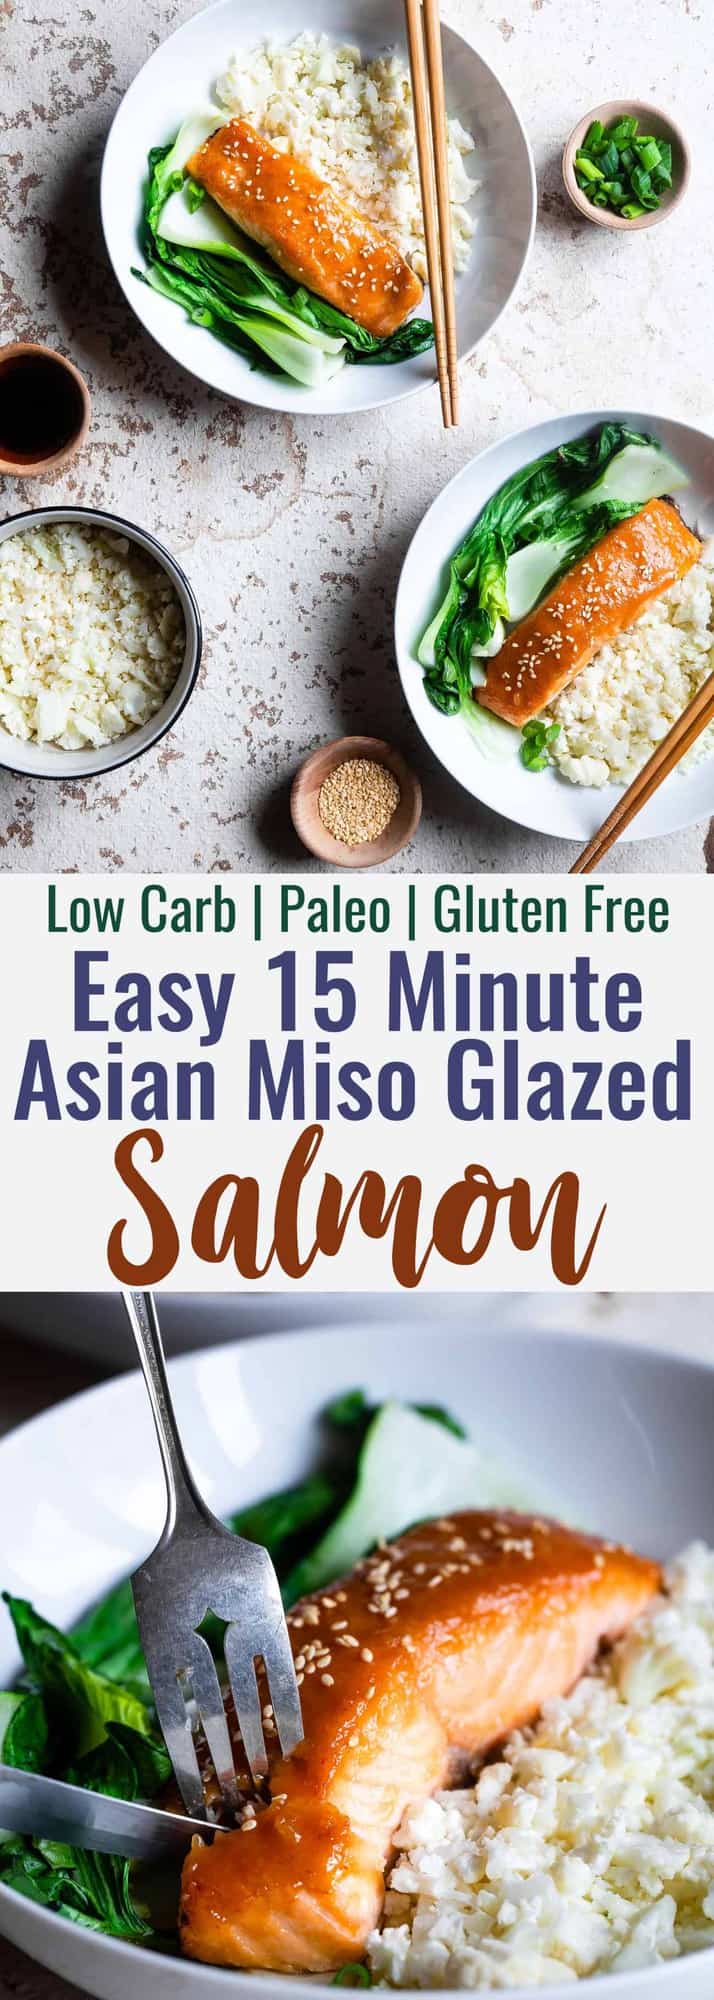 Honey Sriracha Miso Glazed Salmon - An easy, 15 minute weeknight dinner that is big on spicy-sweet asian flavor! A gluten free meal you'll make over and over! Only one Weight Watchers SmartPoint too! | #Foodfaithfitness | #Glutenfree #Lowcarb #Keto #Healthy #Dairyfree